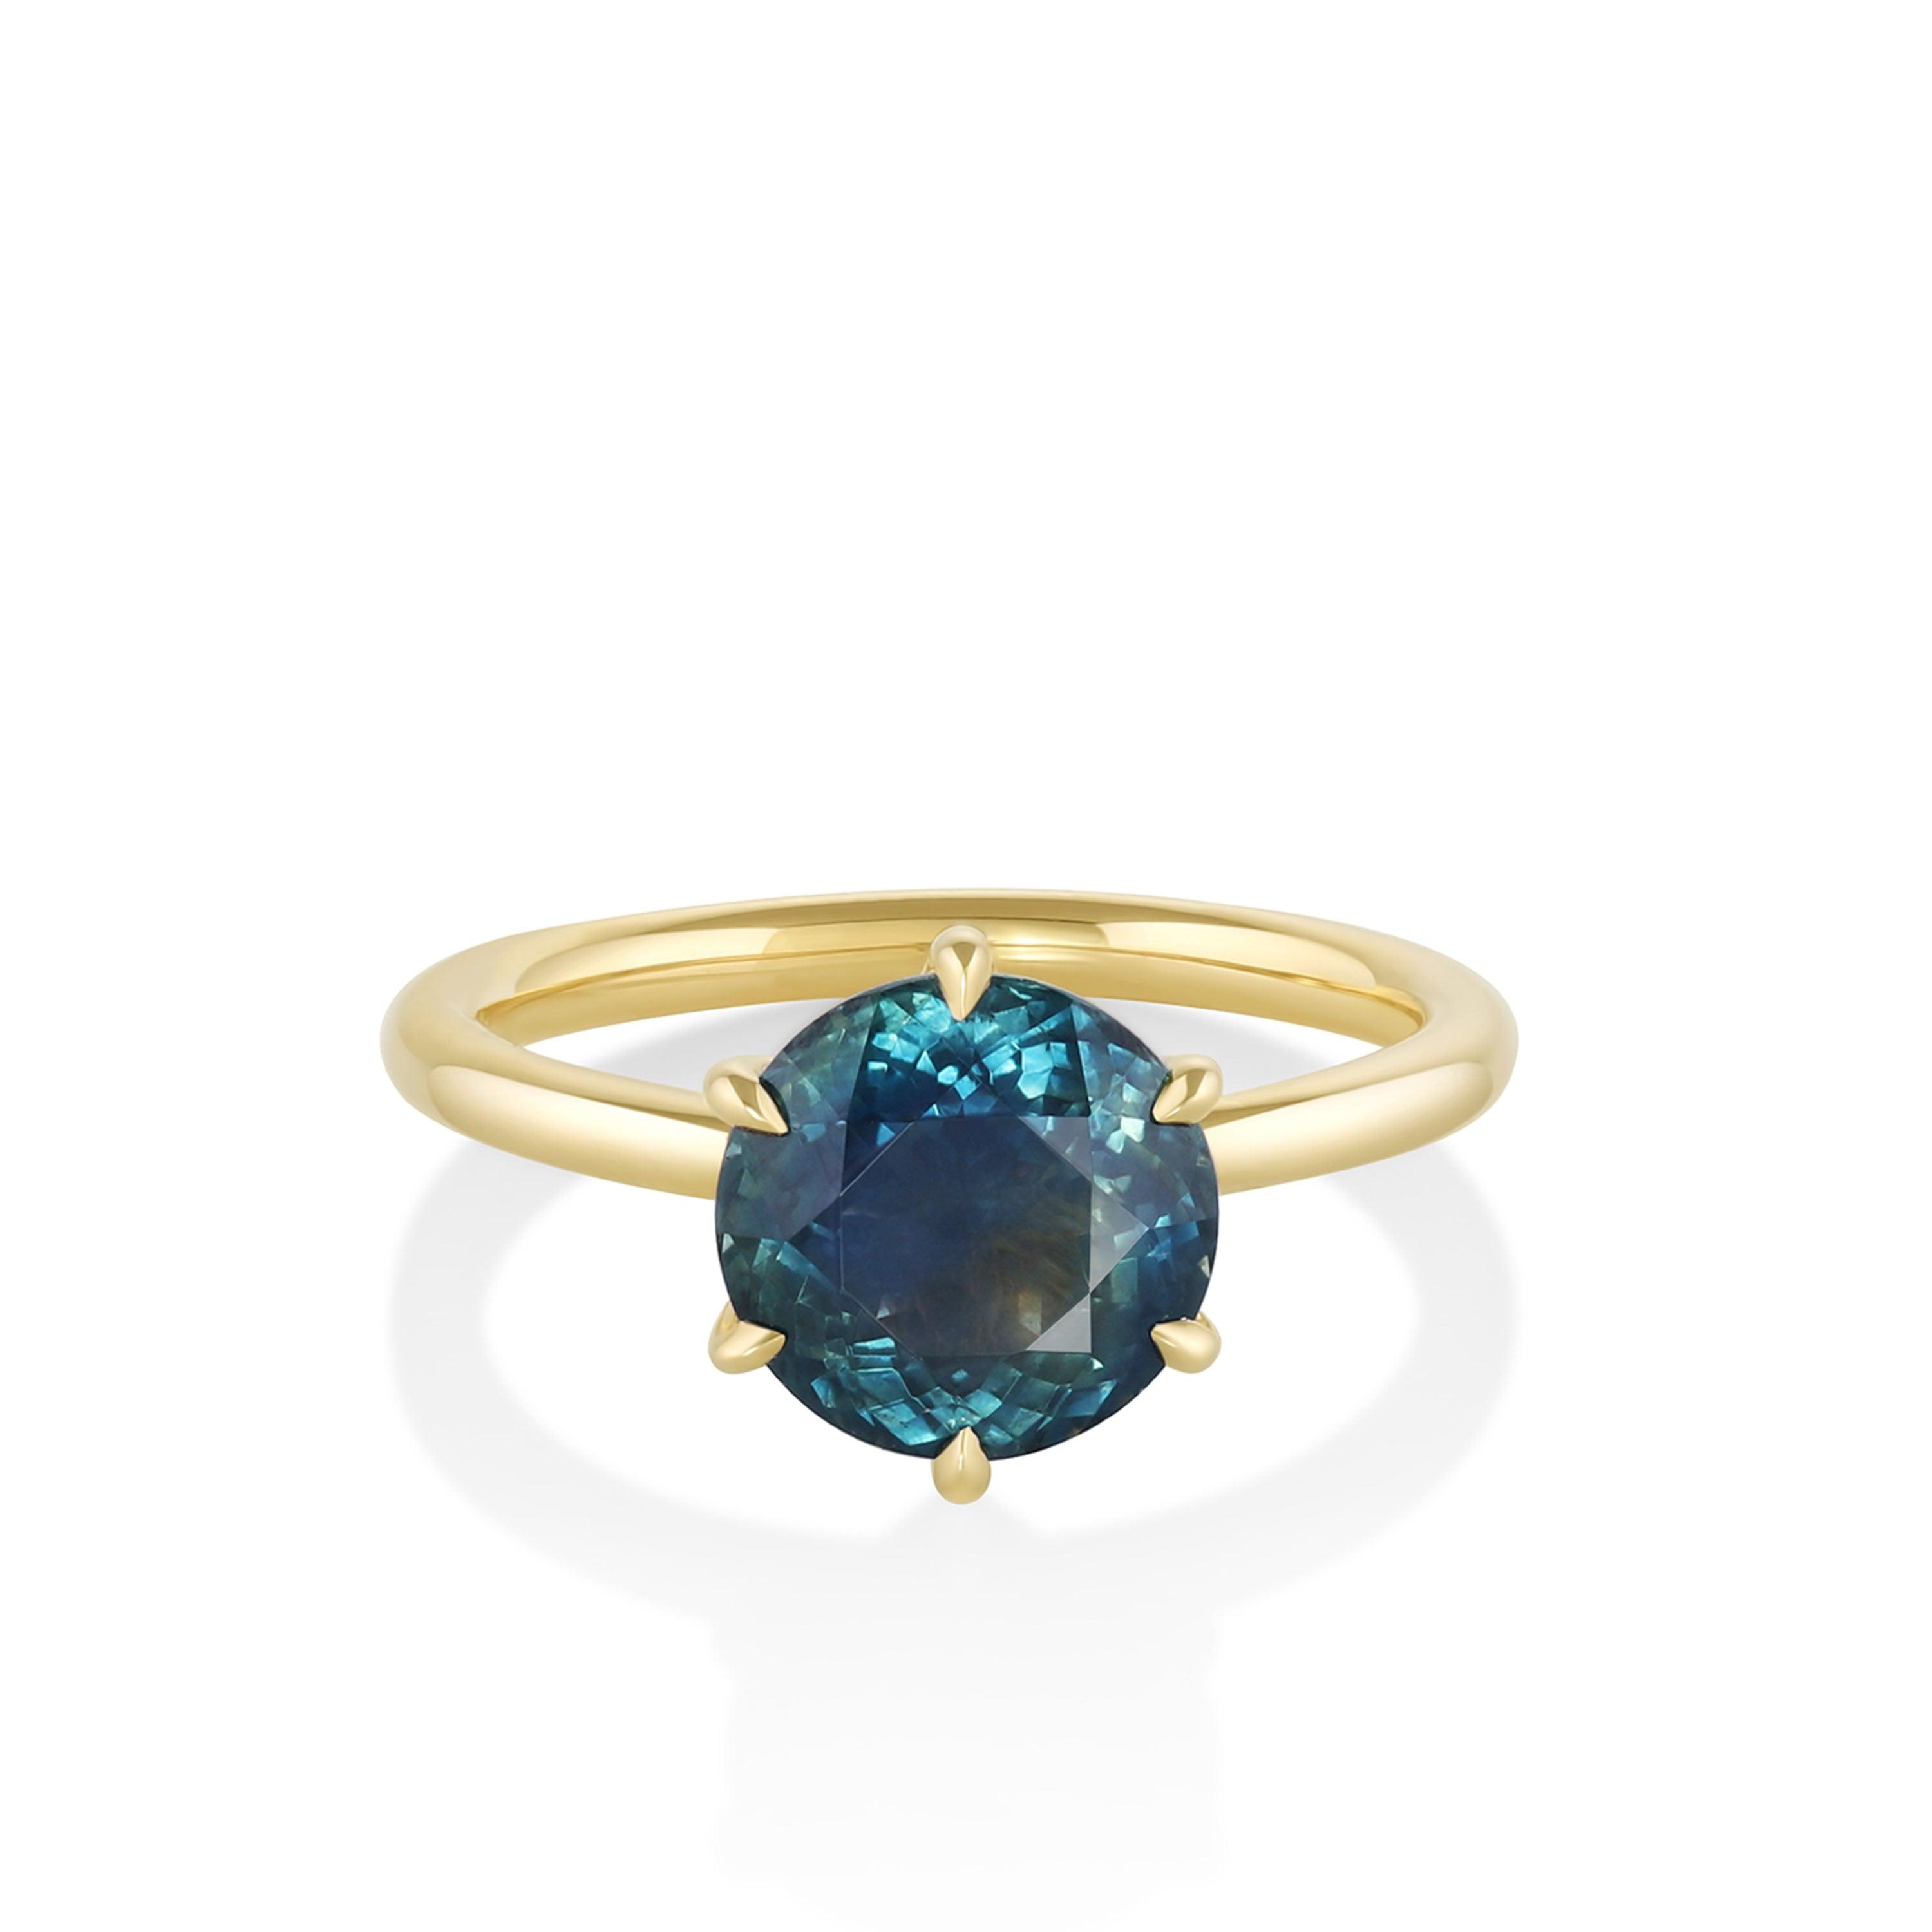 Watercolor sapphire engagement ring